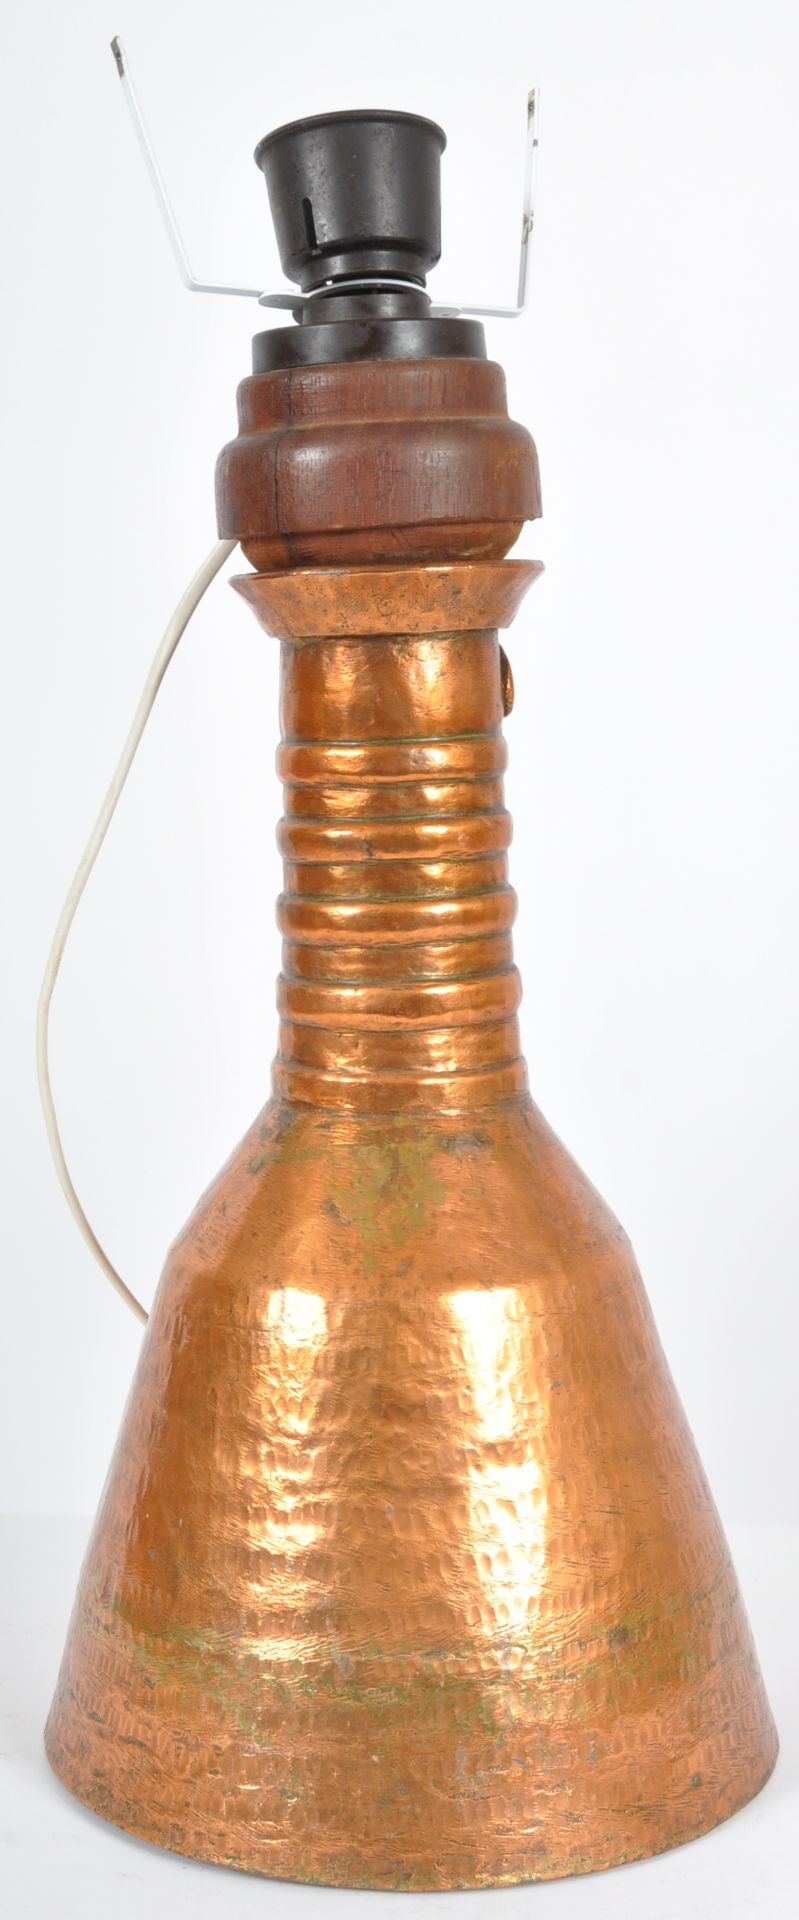 LATE 18TH CENTURY UPCYCLED COPPER EWER JUG LAMP - Image 8 of 8